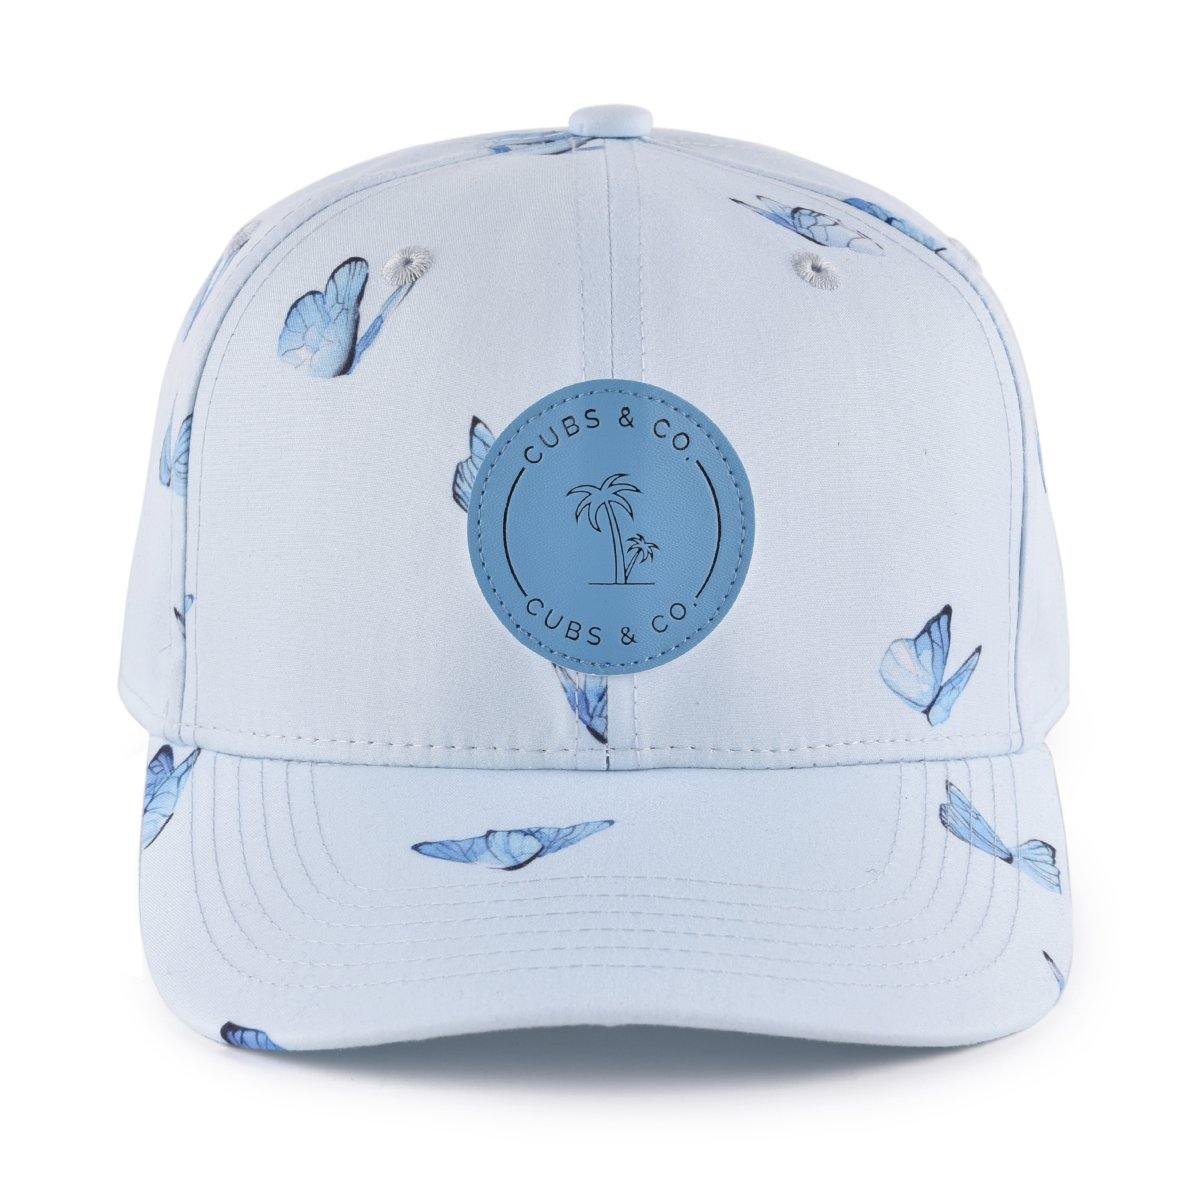 Blue butterfly snapback baseball cap for babies and kids. Cubs & Co. Australia